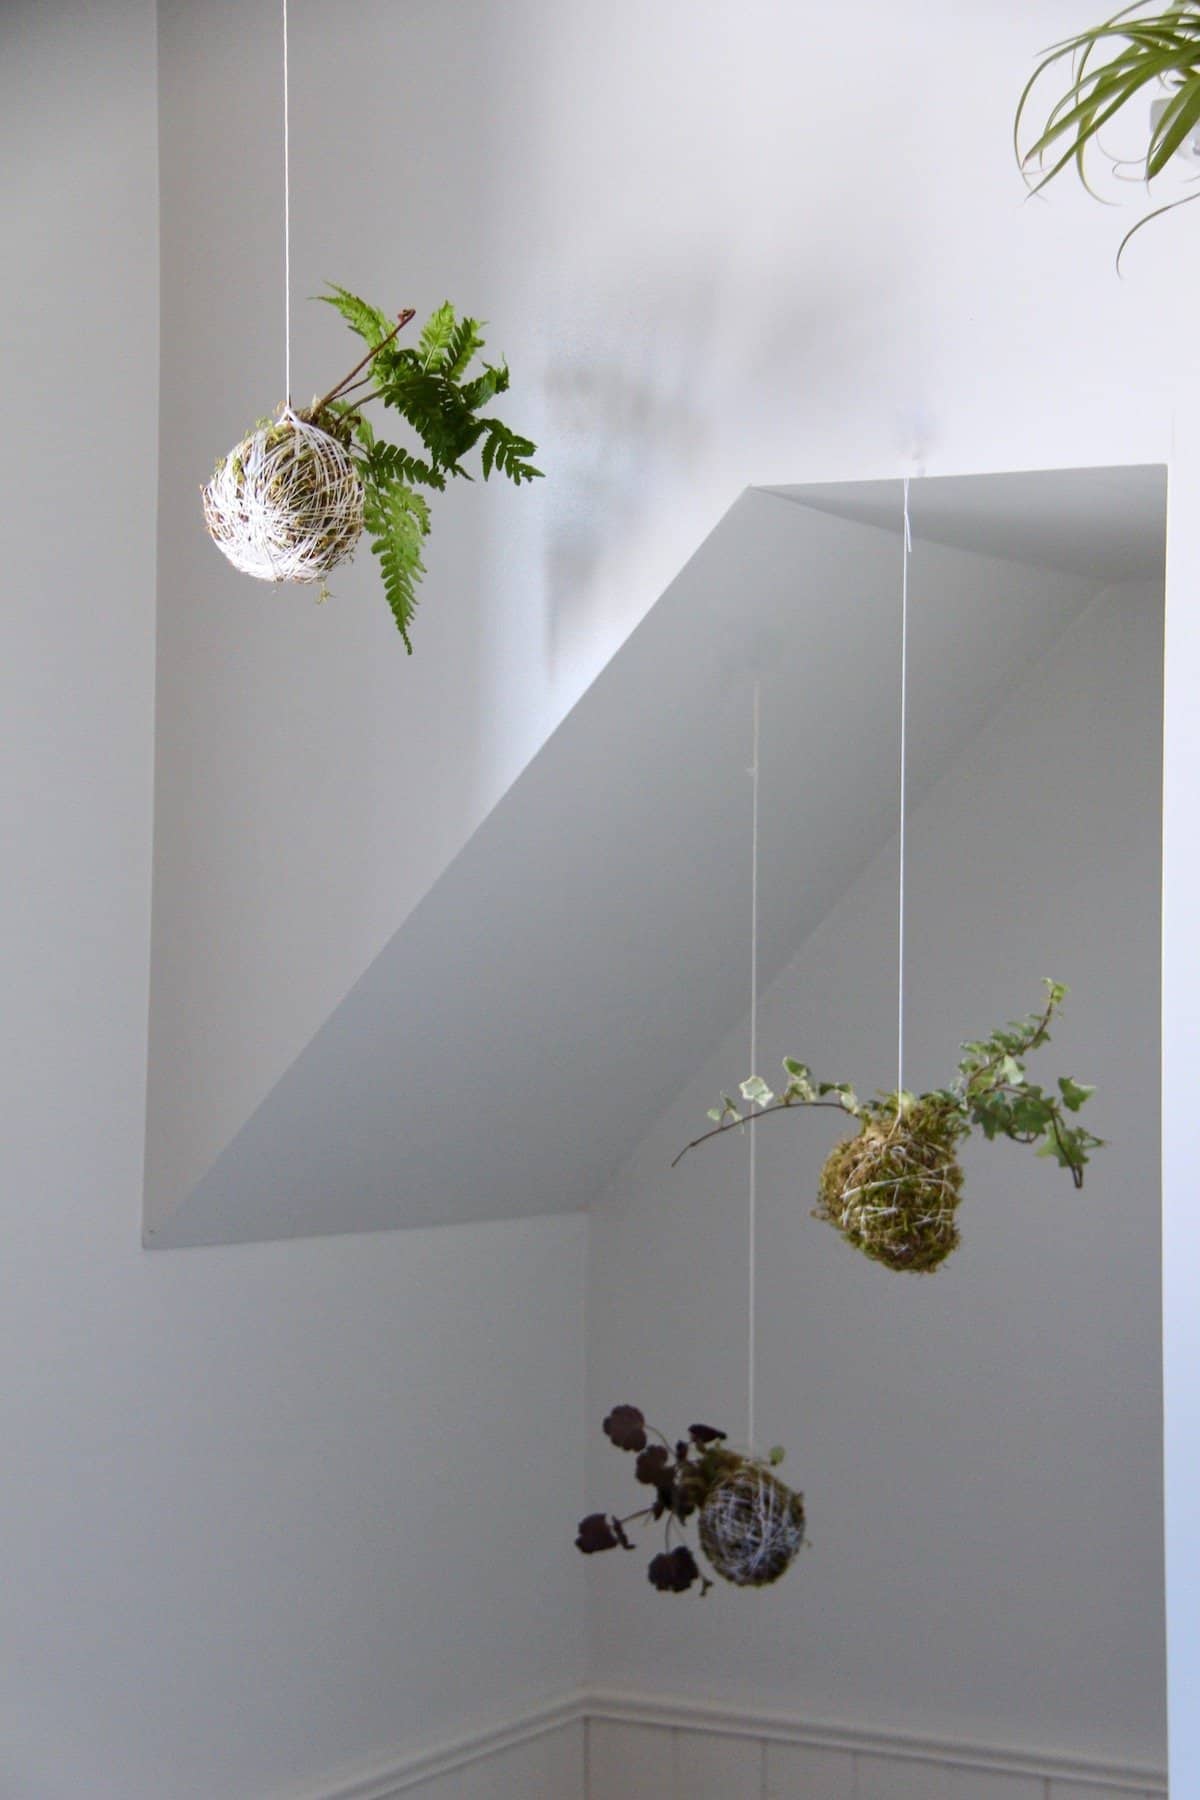 Three hanging moss ball string garden kokedama against a white wall with an alcove